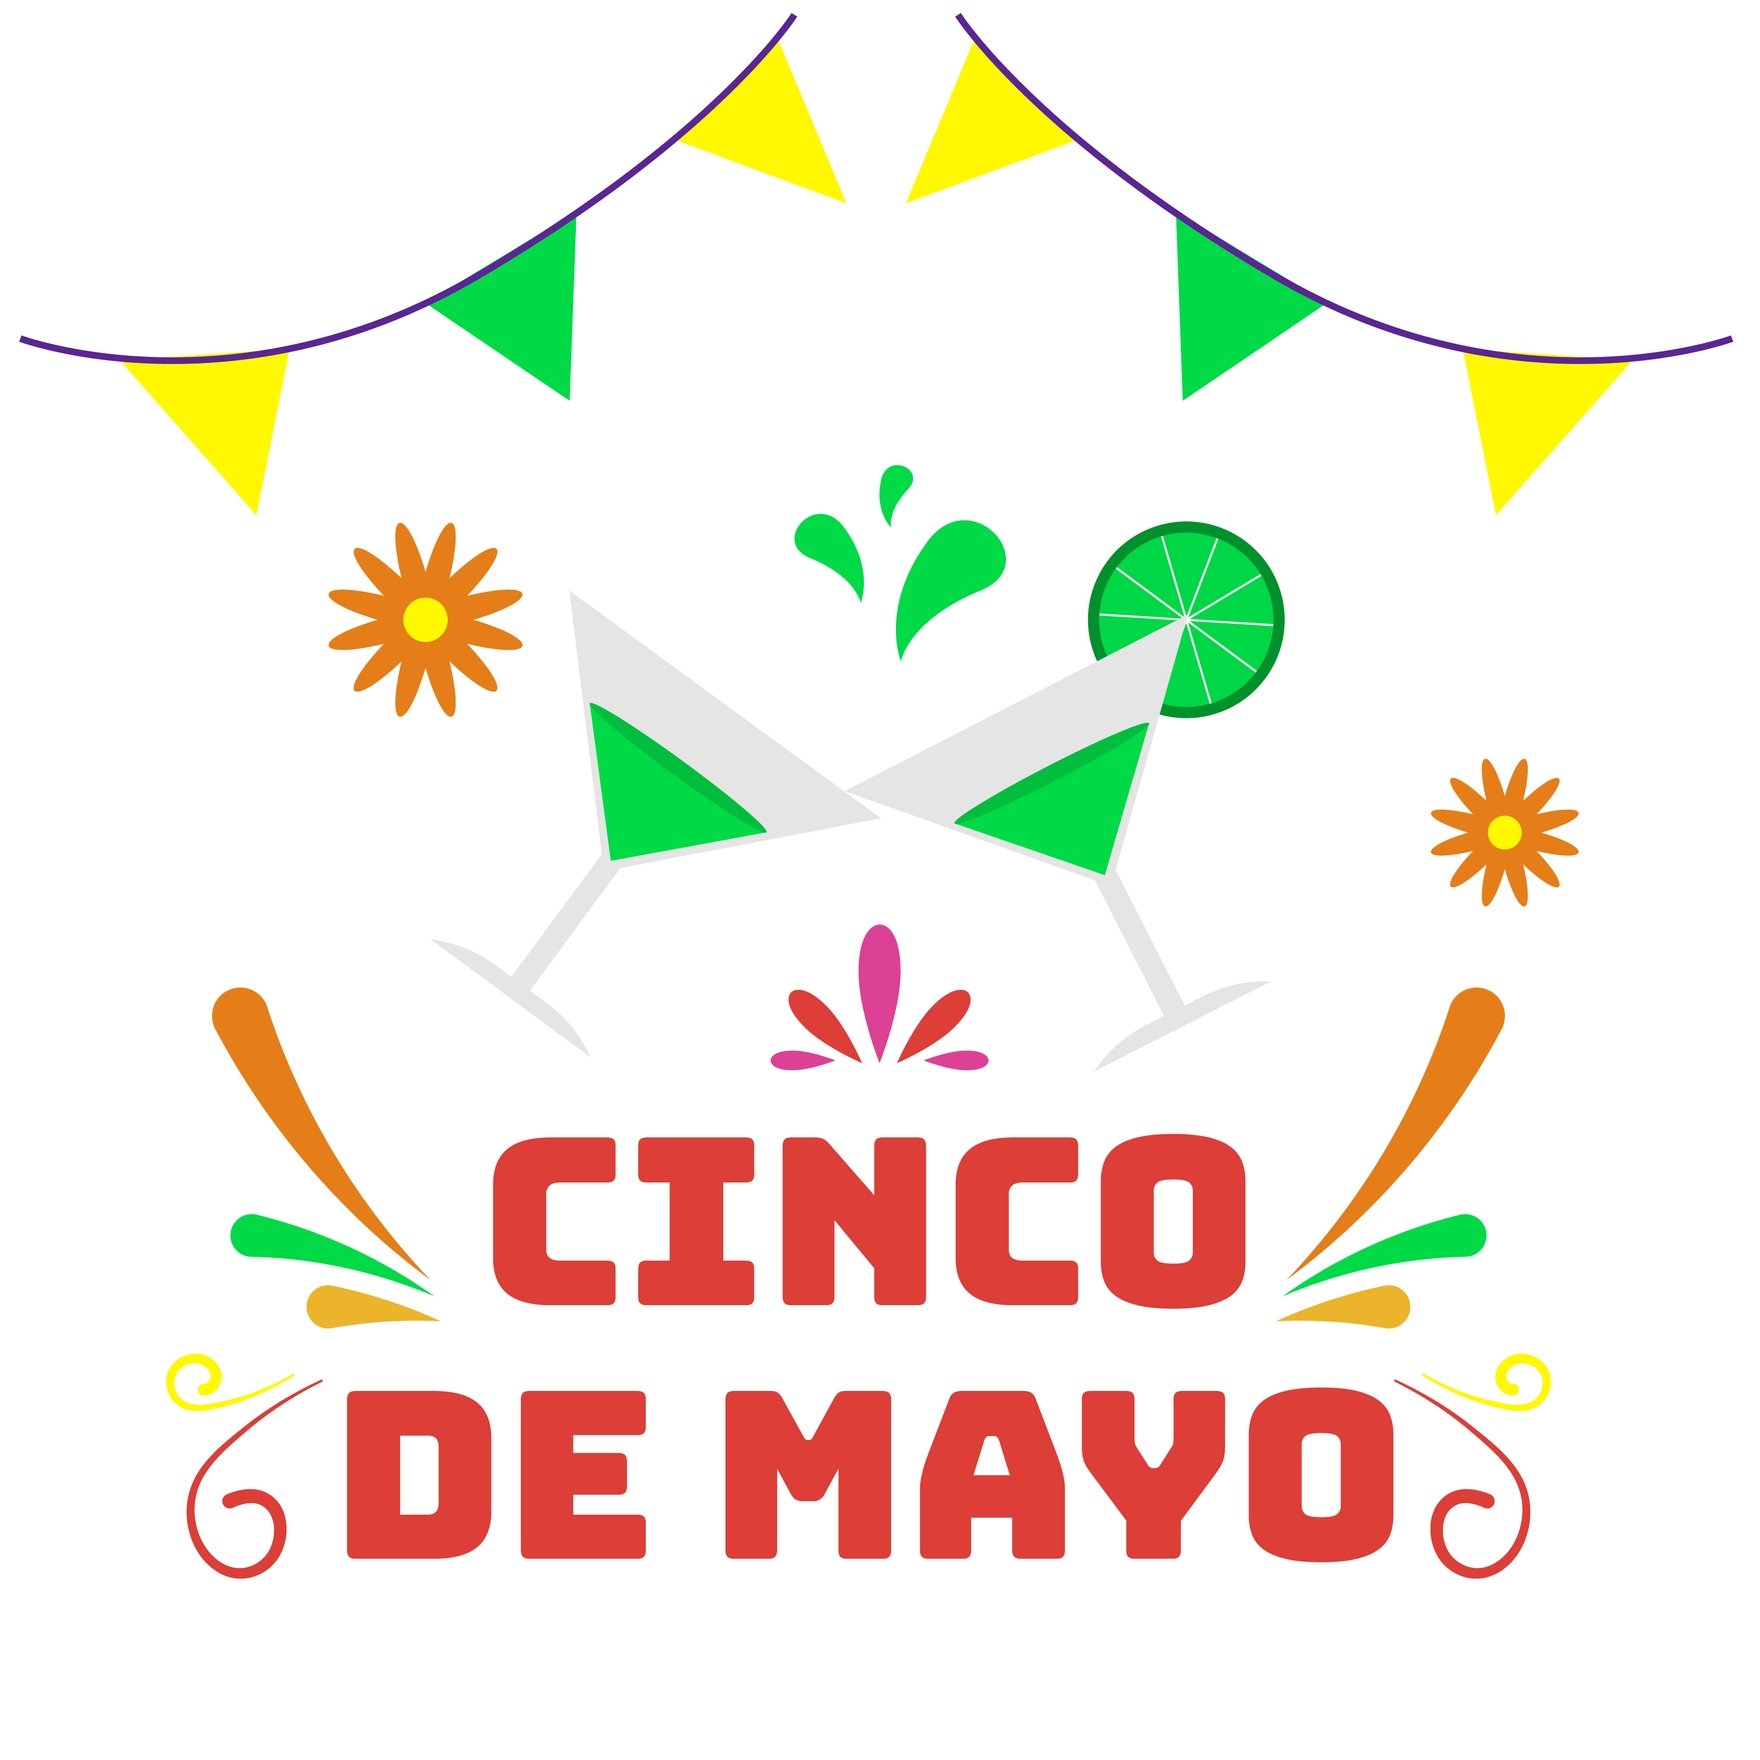 Drunk Cinco De Mayo GIF in Illustrator, EPS, SVG, JPG, GIF, PNG, After Effects